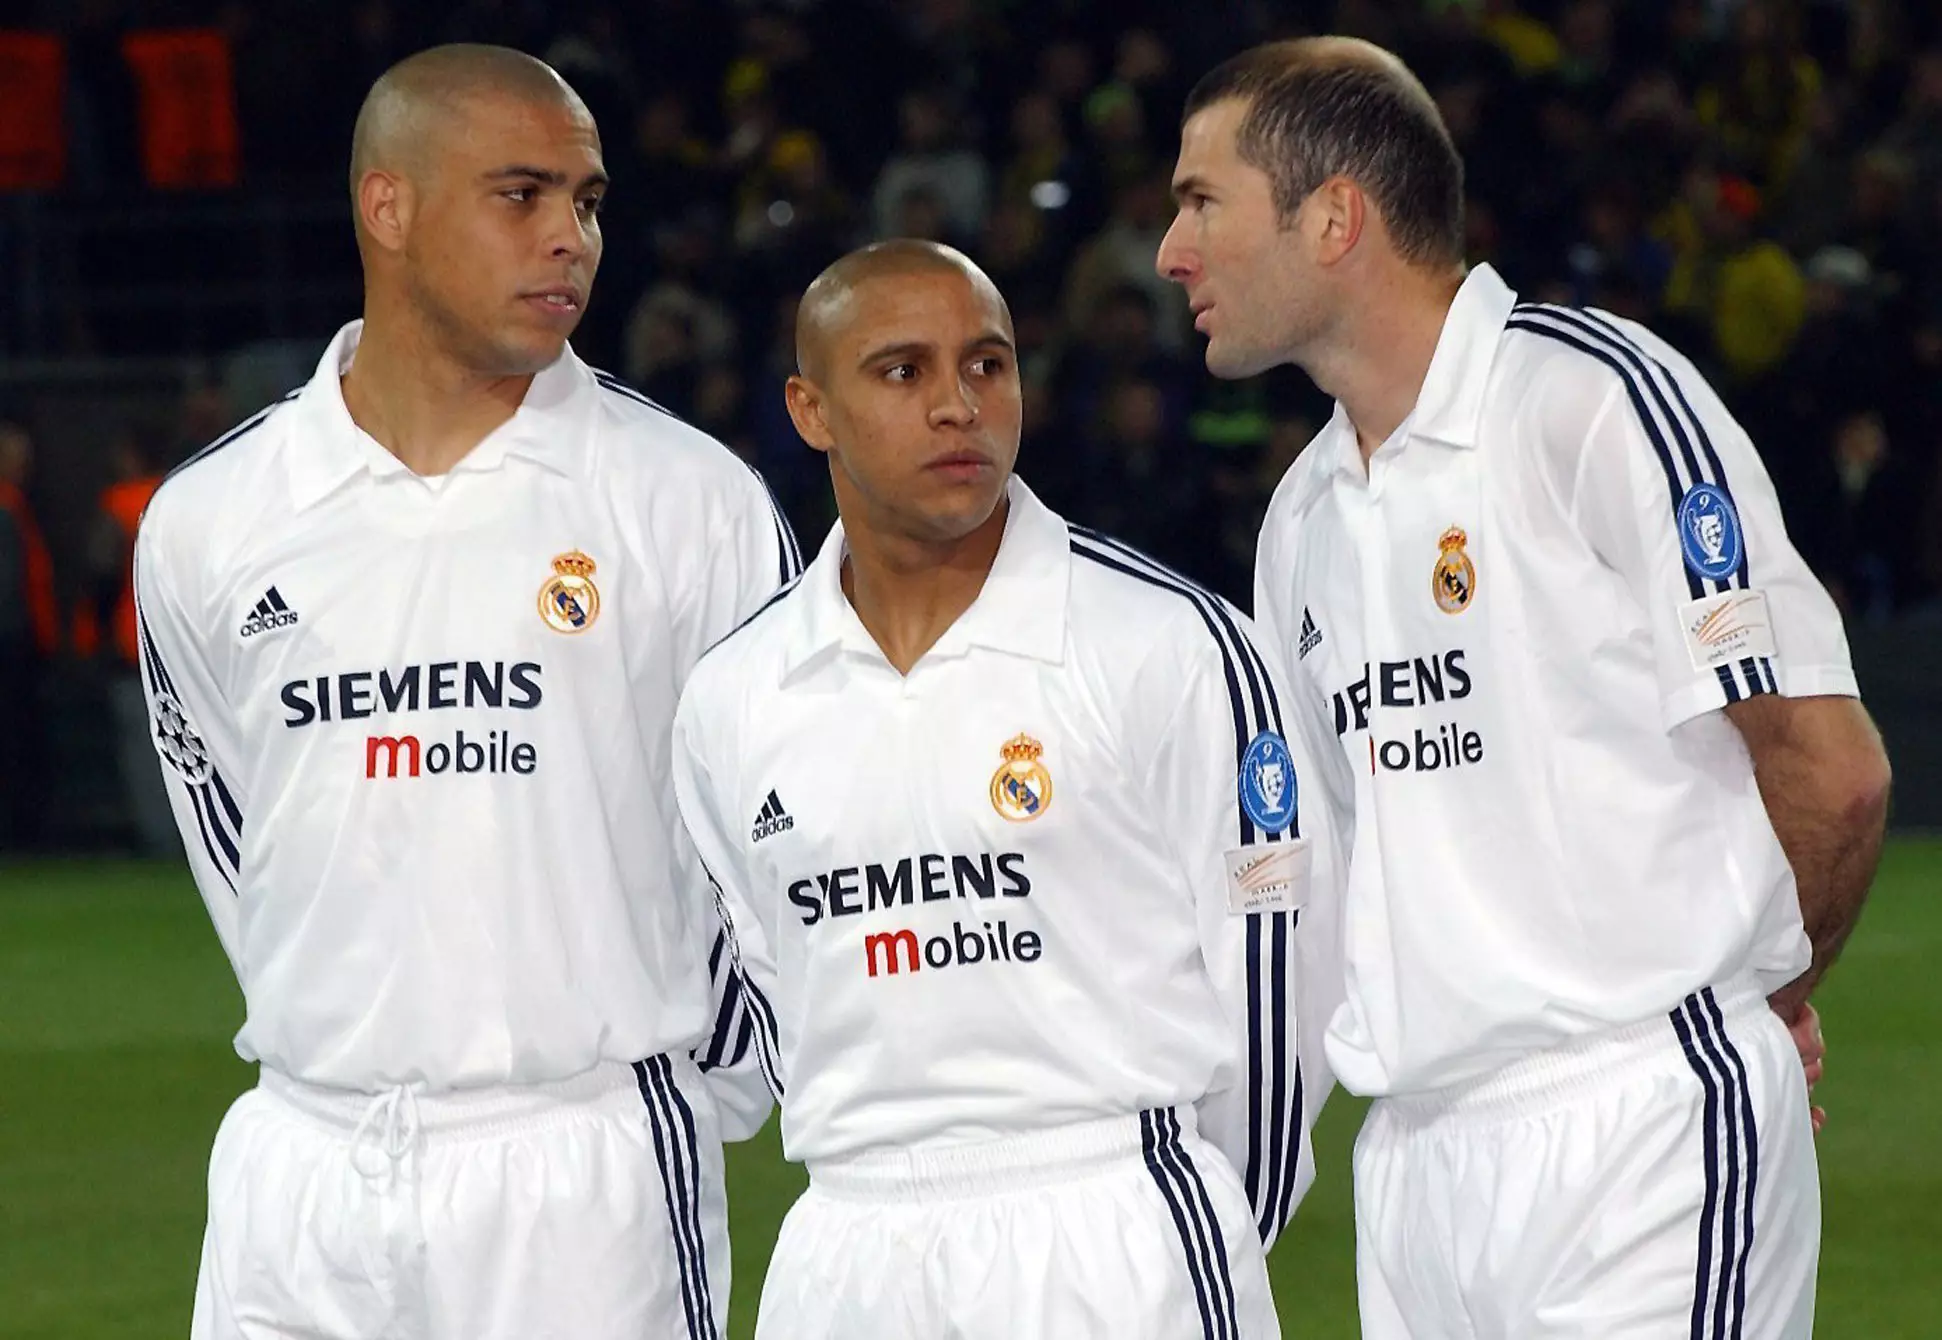 Ronaldo (L) and Zidane (R) with Real Madrid teammate Roberto Carlos (C) in 2003. (Image